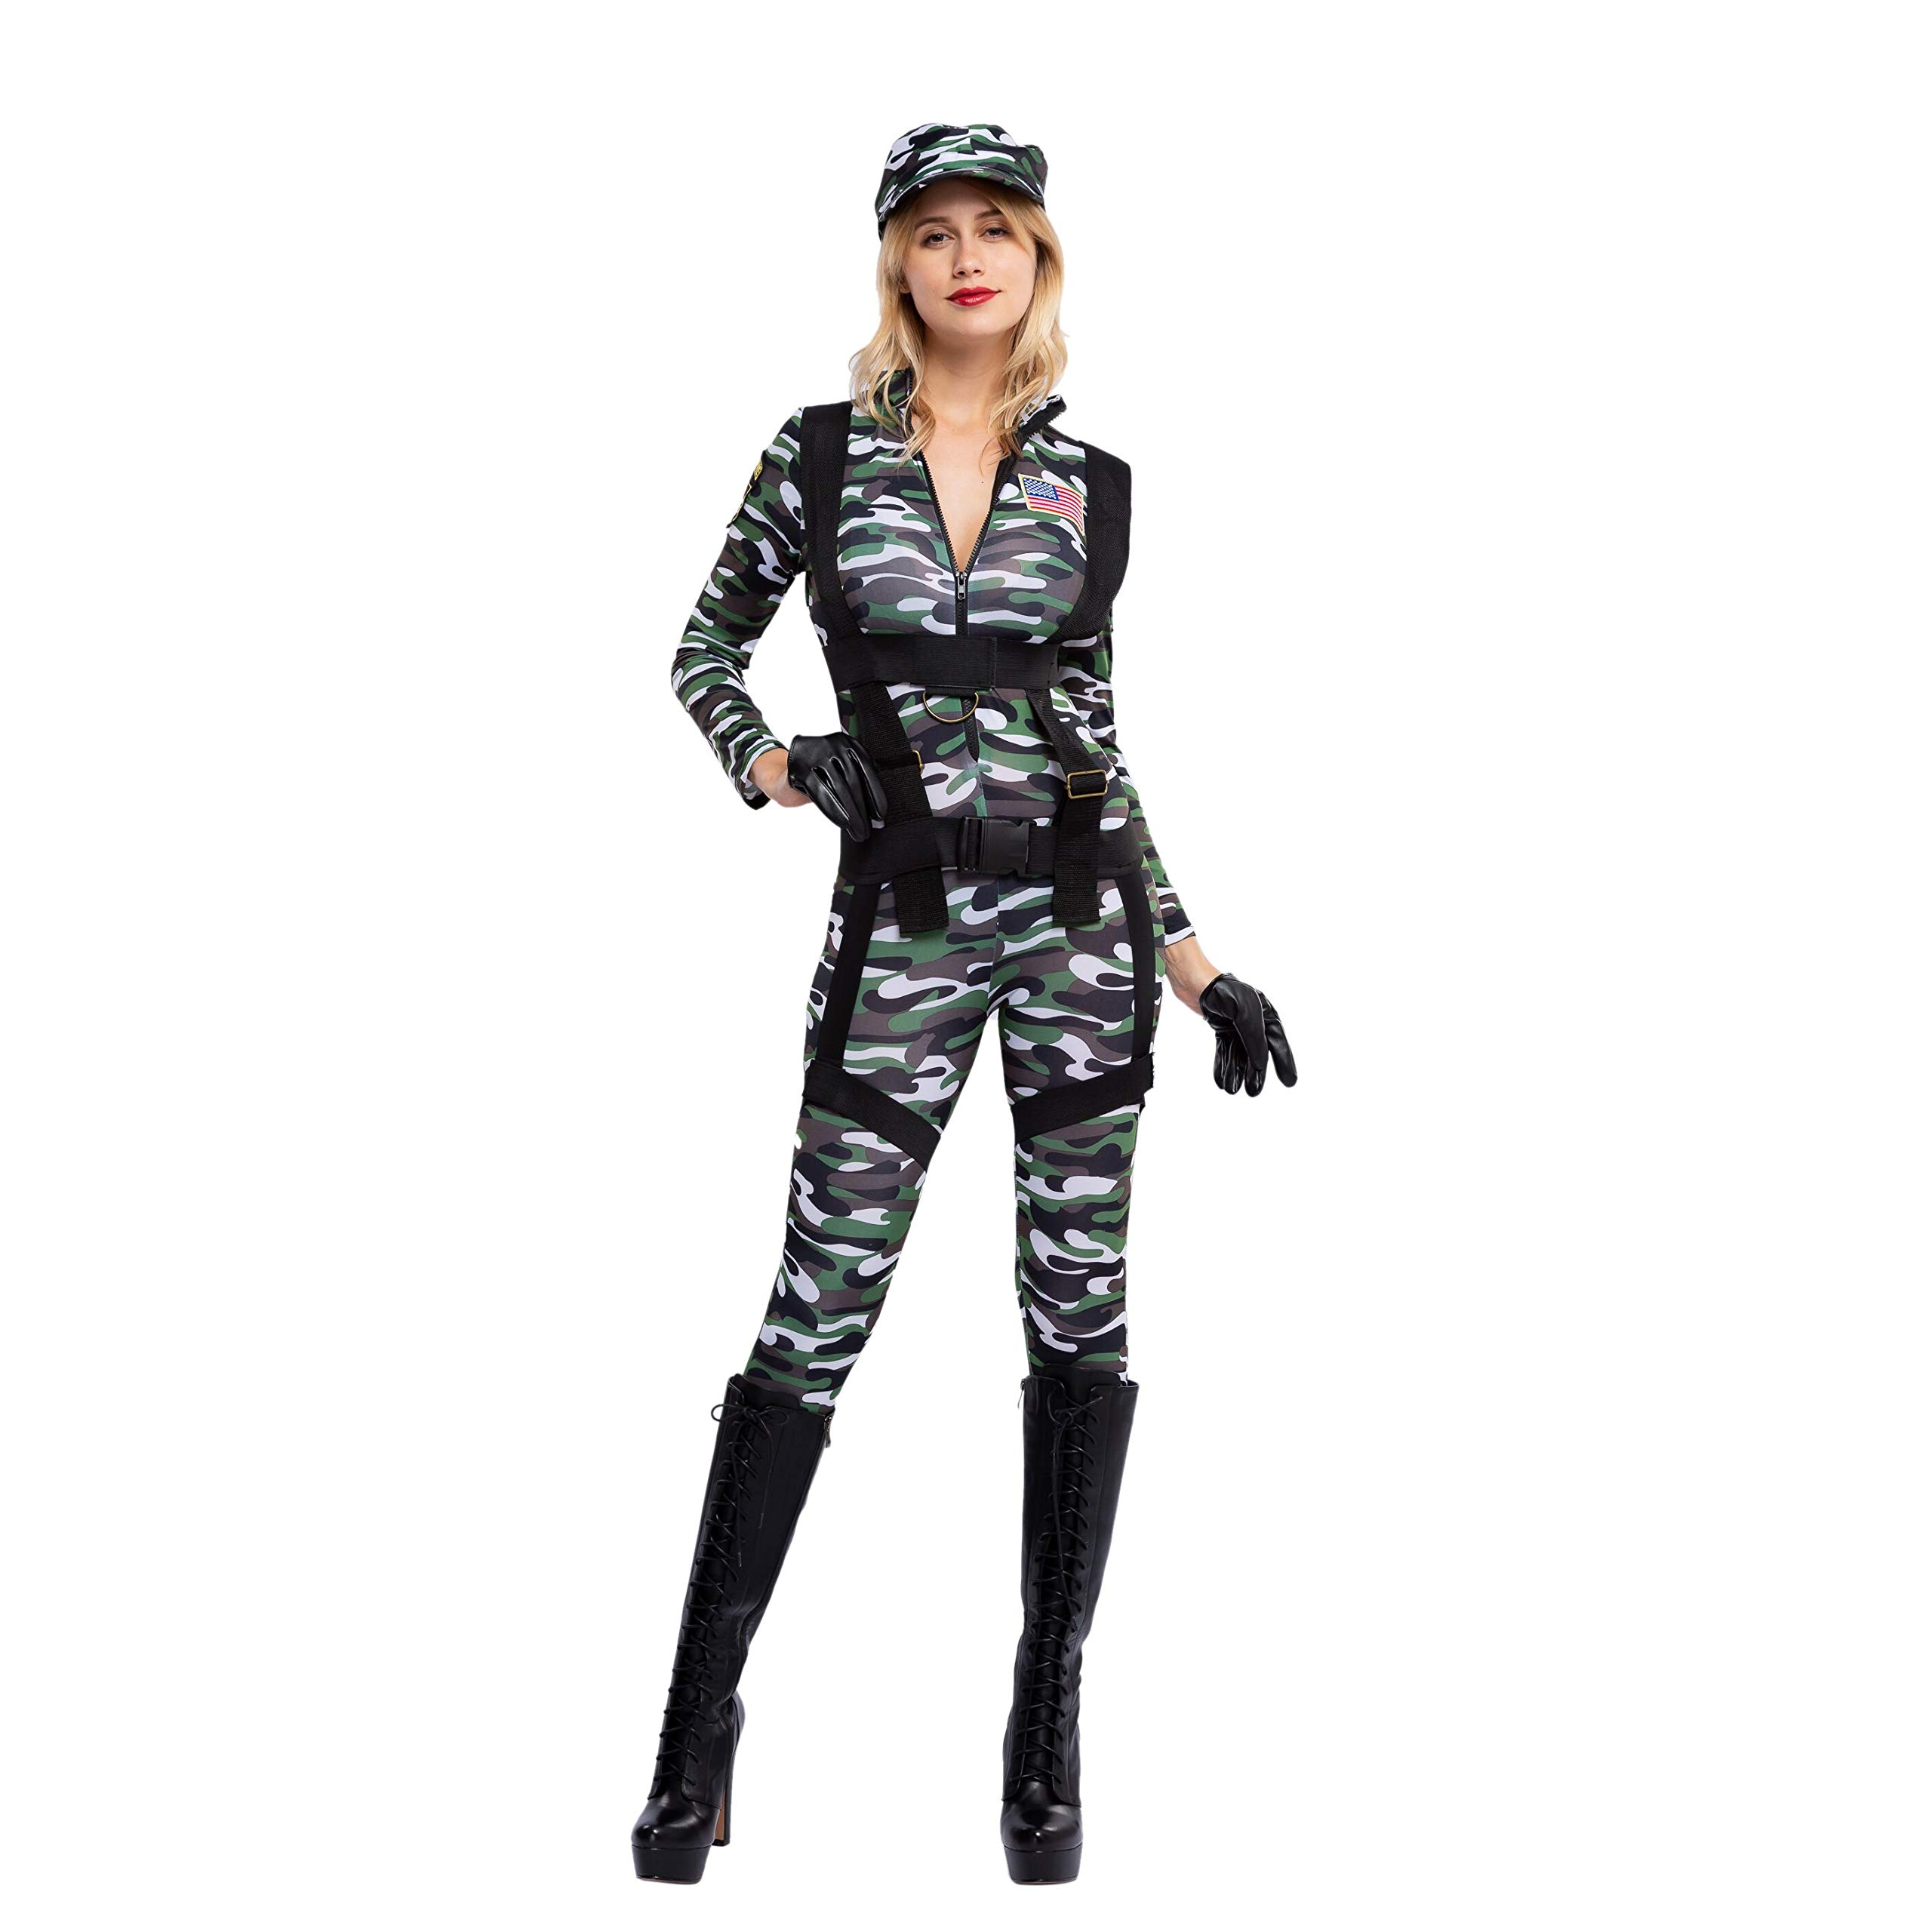 Spooktacular Creations Halloween Women Paratrooper Army Jumpsuit, Military Camouflage Costume w/ Hat, Gloves and Harness X-Large